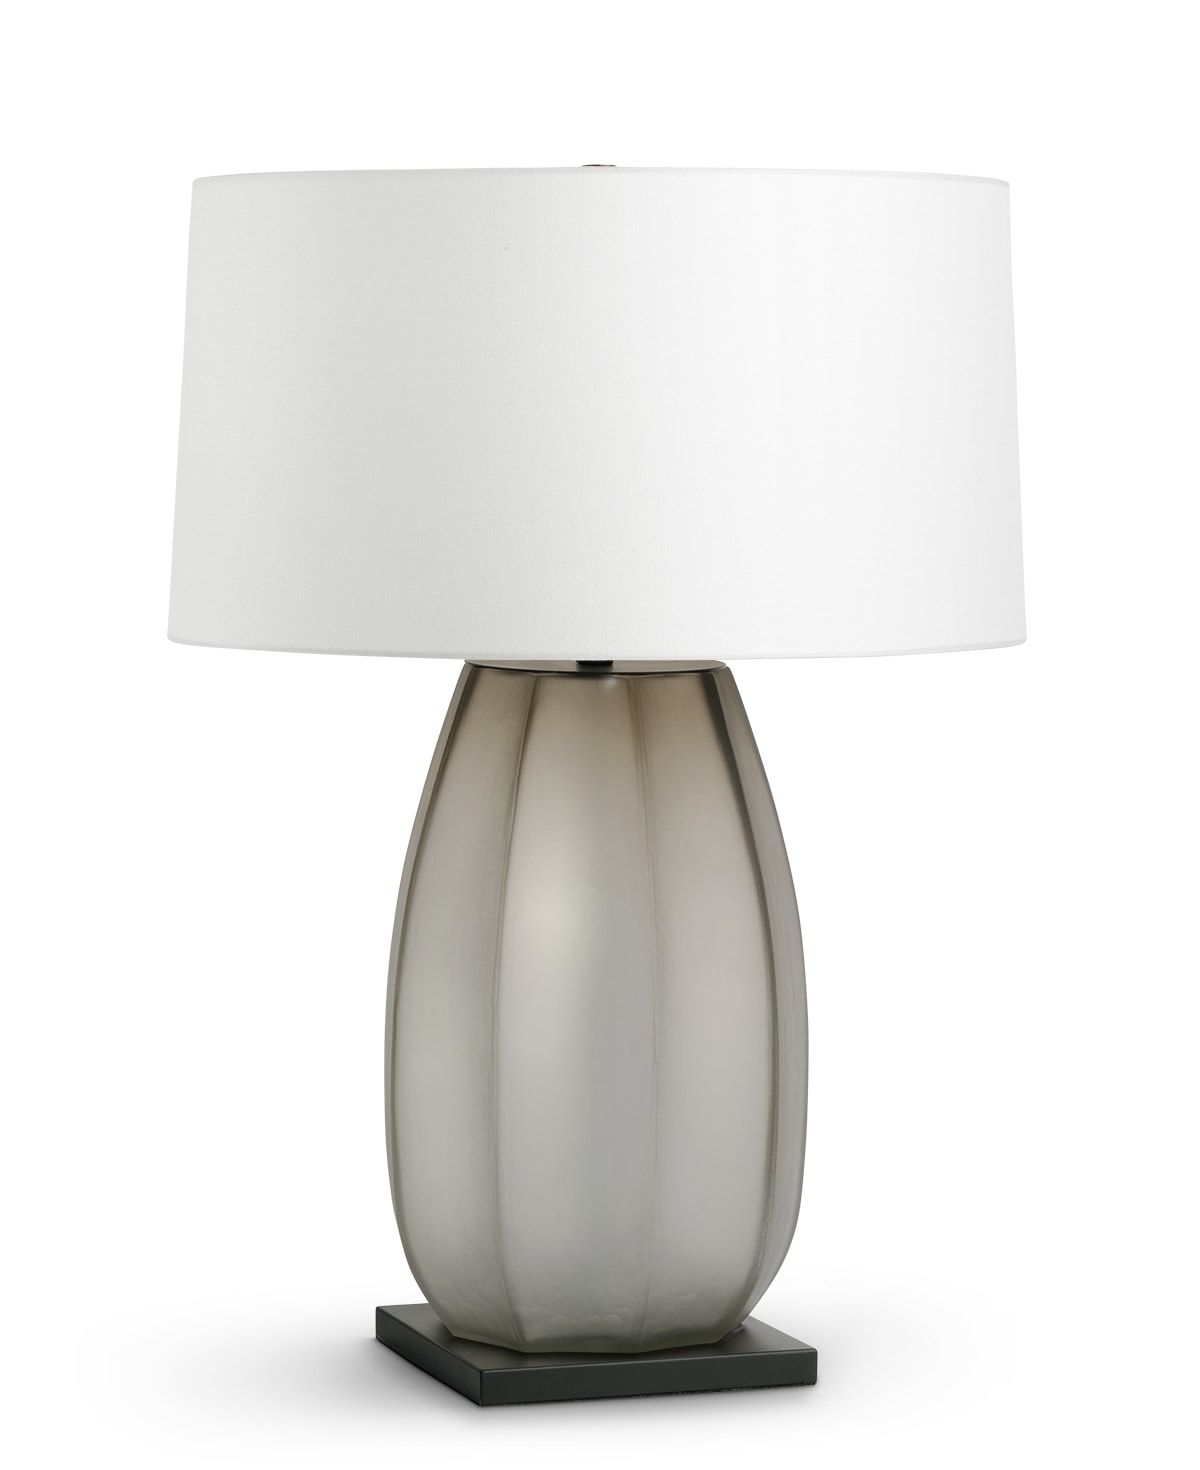 FlowDecor Nadia Table Lamp in glass with taupe finish and metal base with bronze finish and off-white linen oval shade (# 4619)